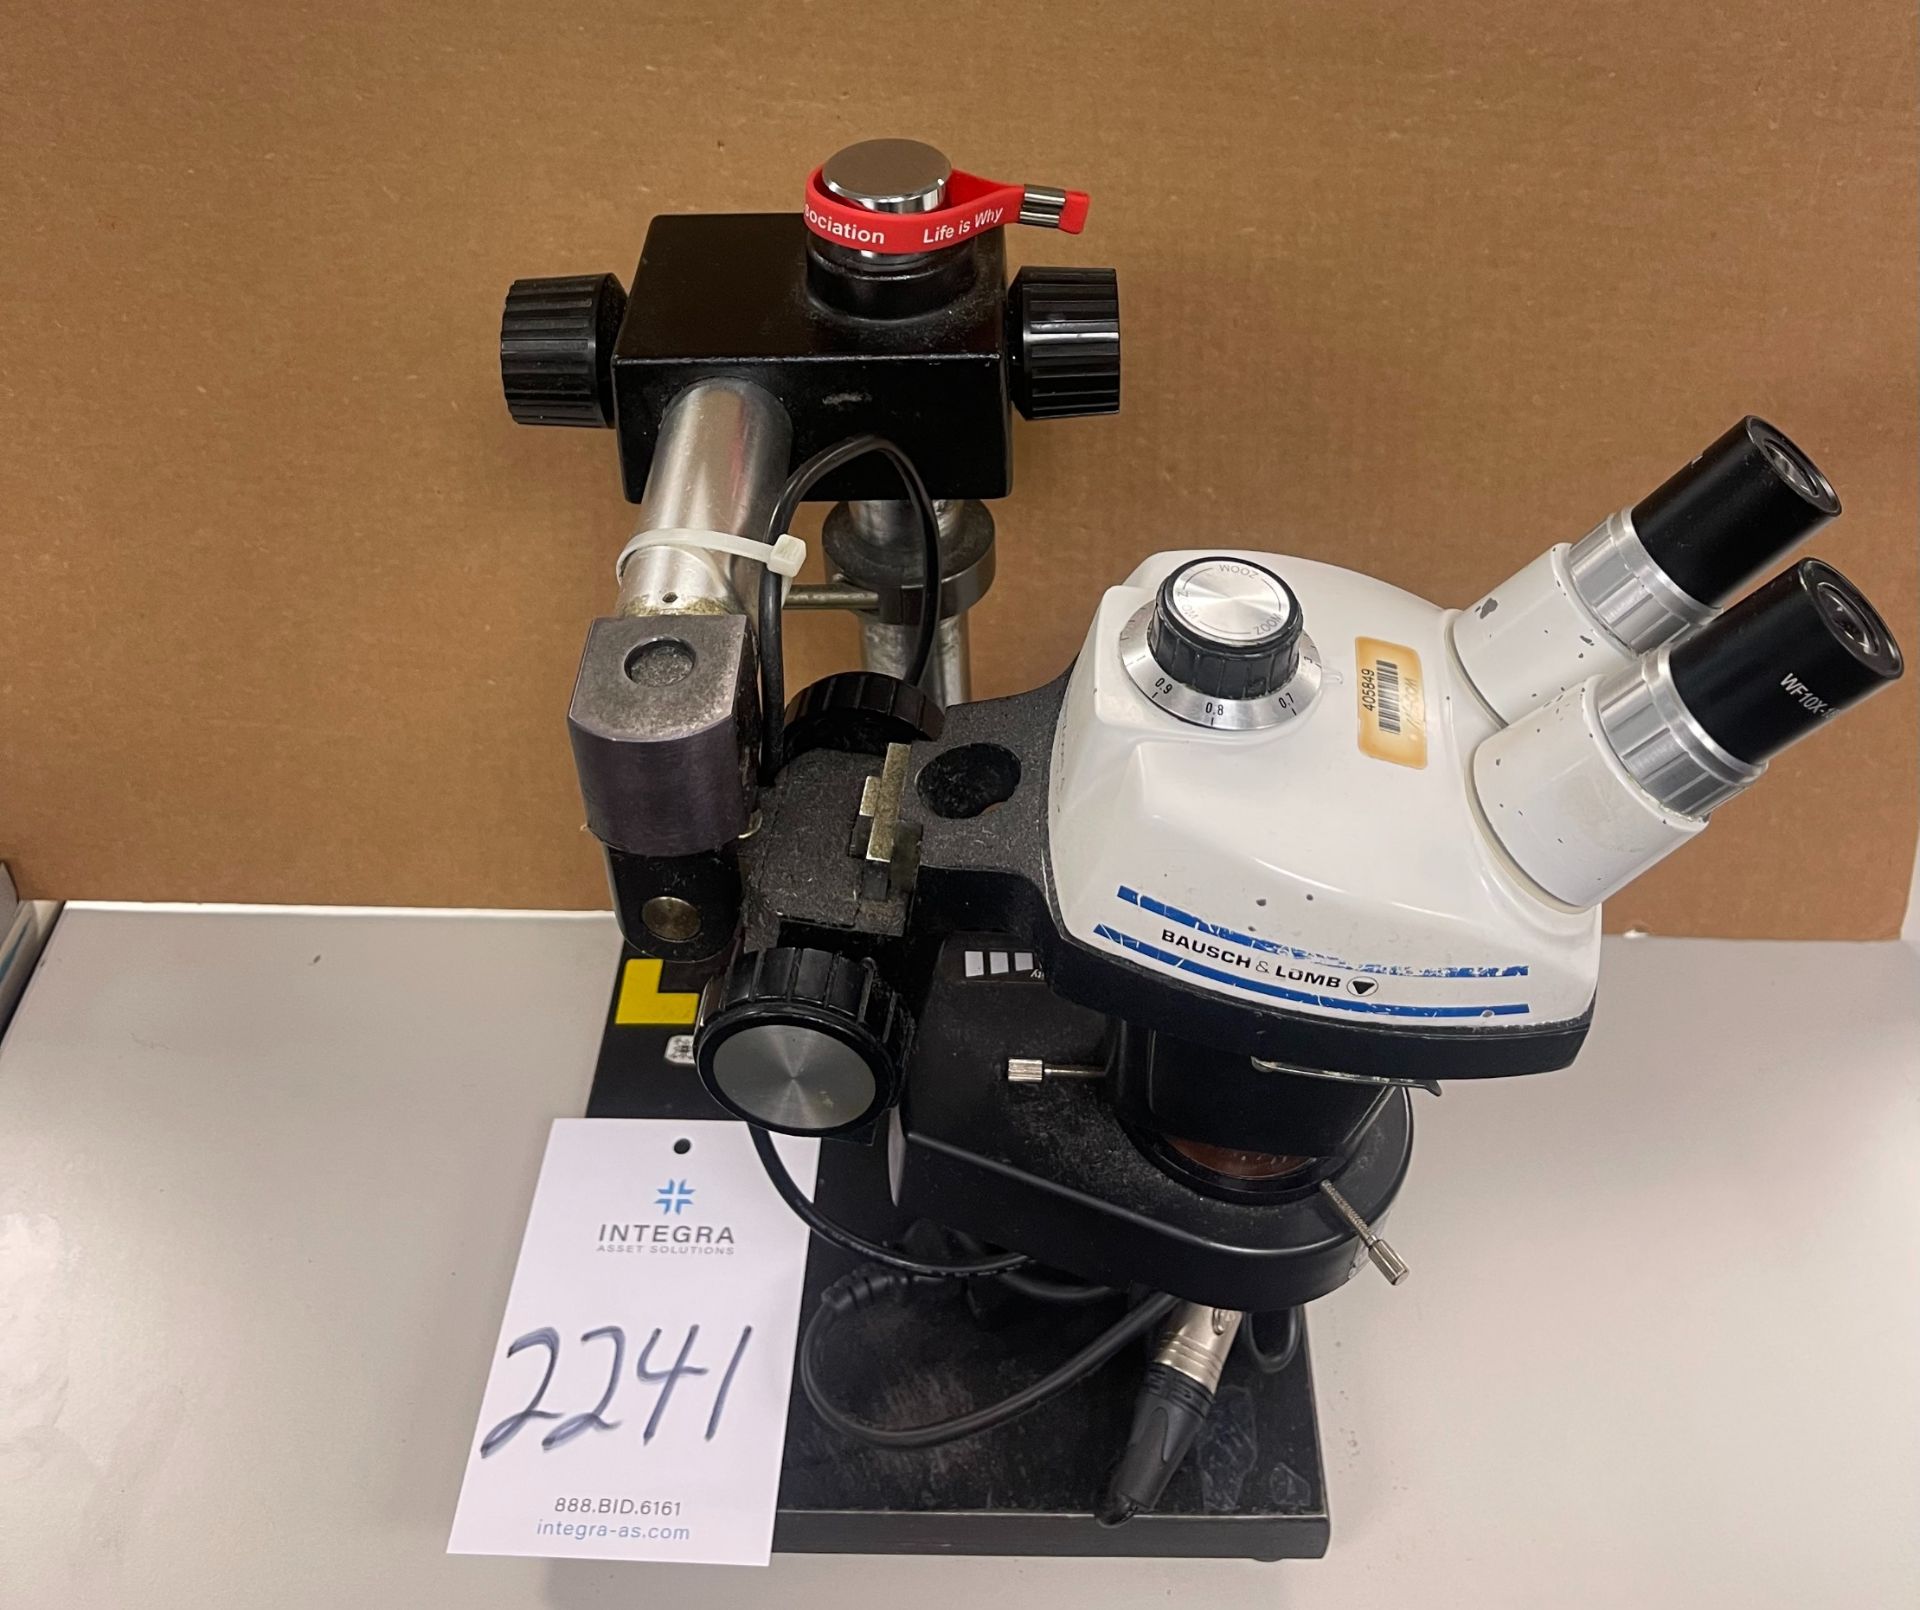 Bausch & Lomb StereoZoom 4 Microscope